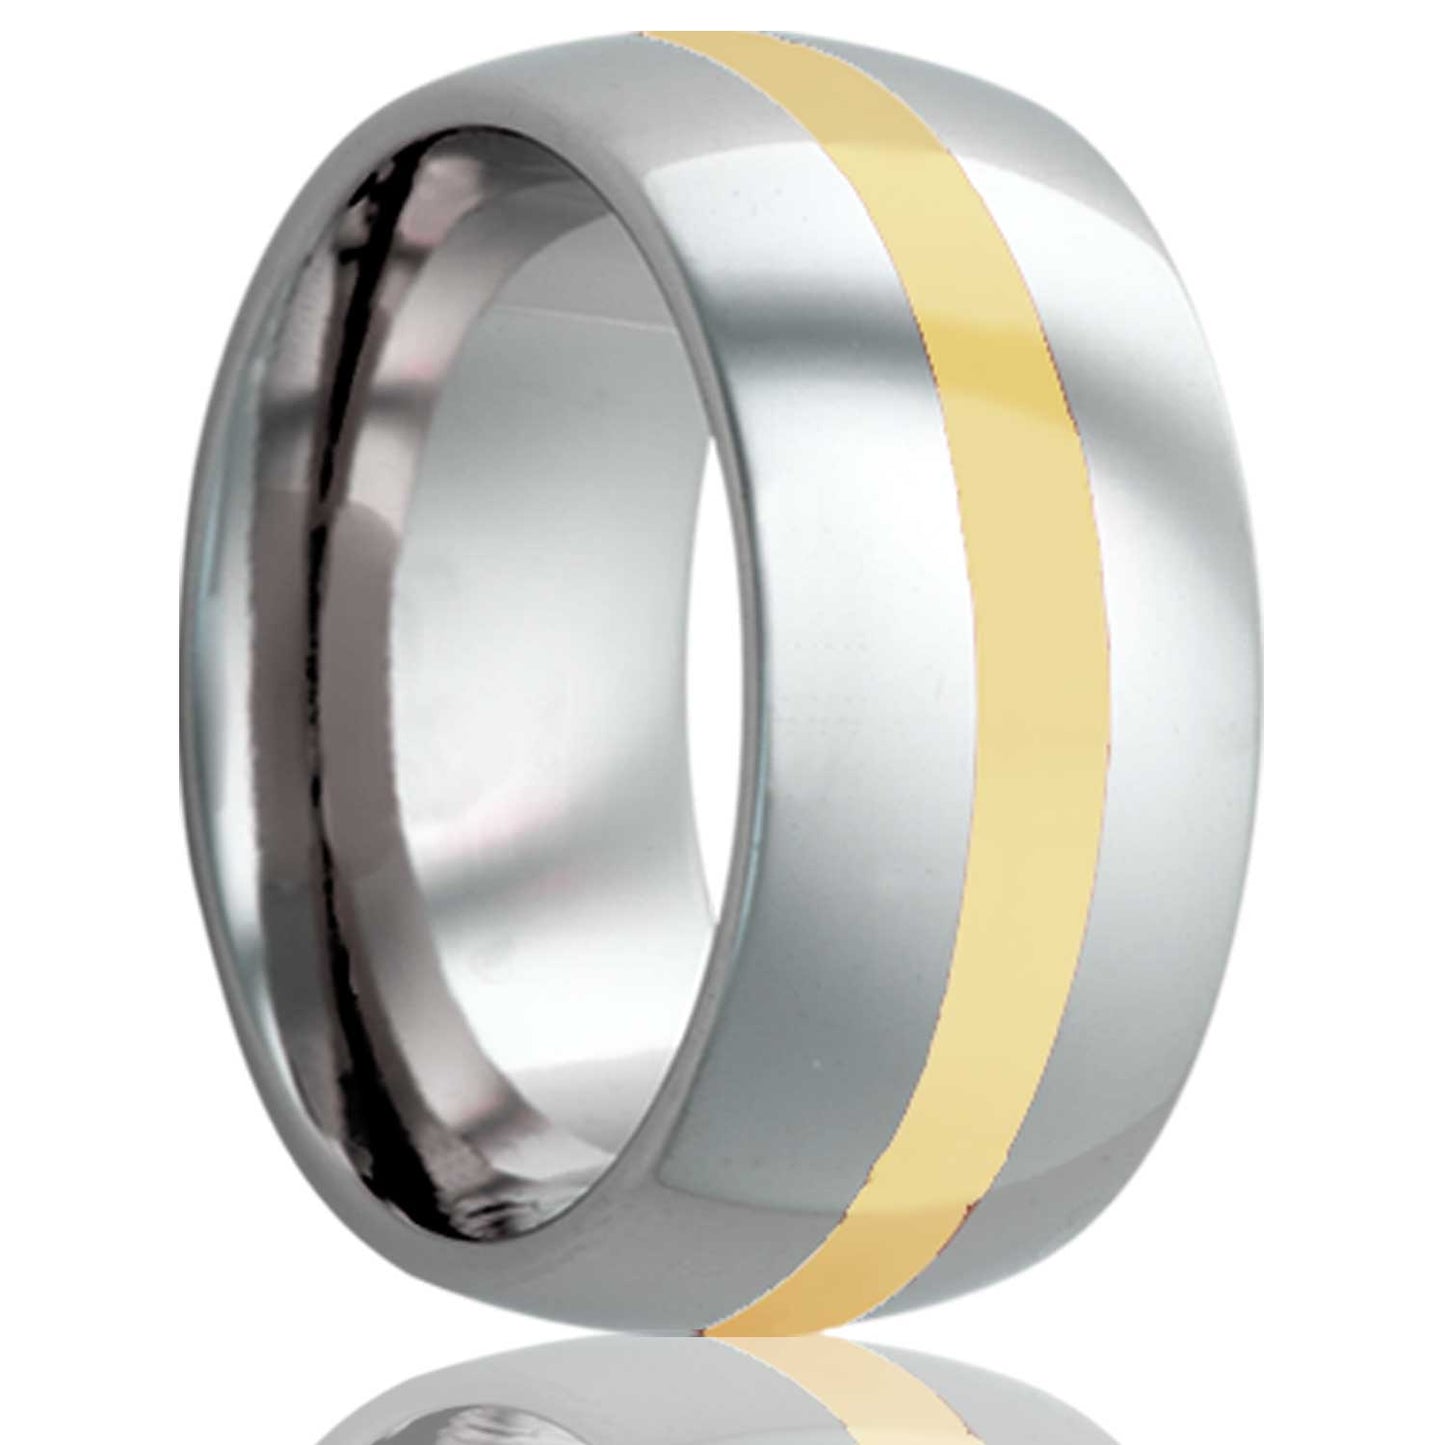 A 14k yellow gold inlay domed tungsten wedding band displayed on a neutral white background.